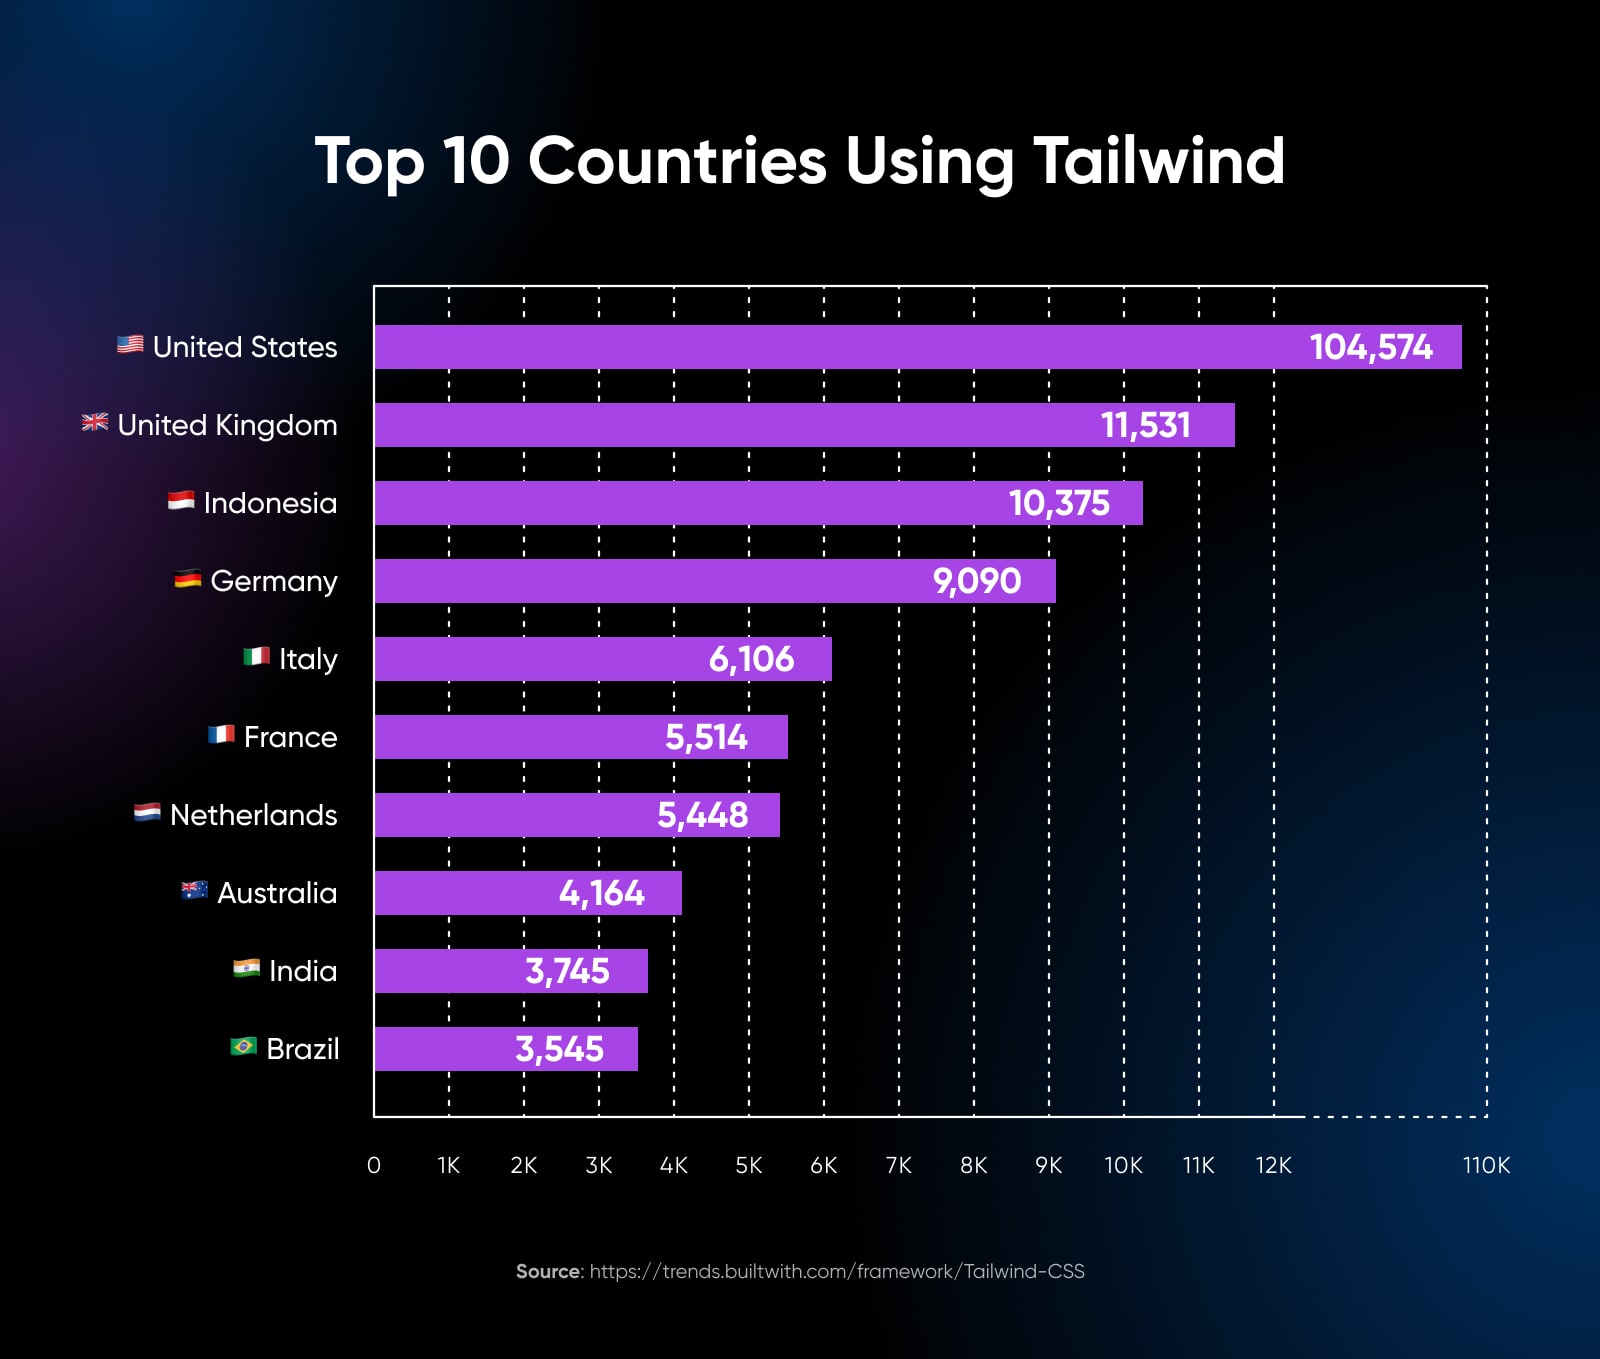 Statistics of "Top 10 Countries Using Tailwind" in a chart showing USA at the top and Brazil at the bottom. 